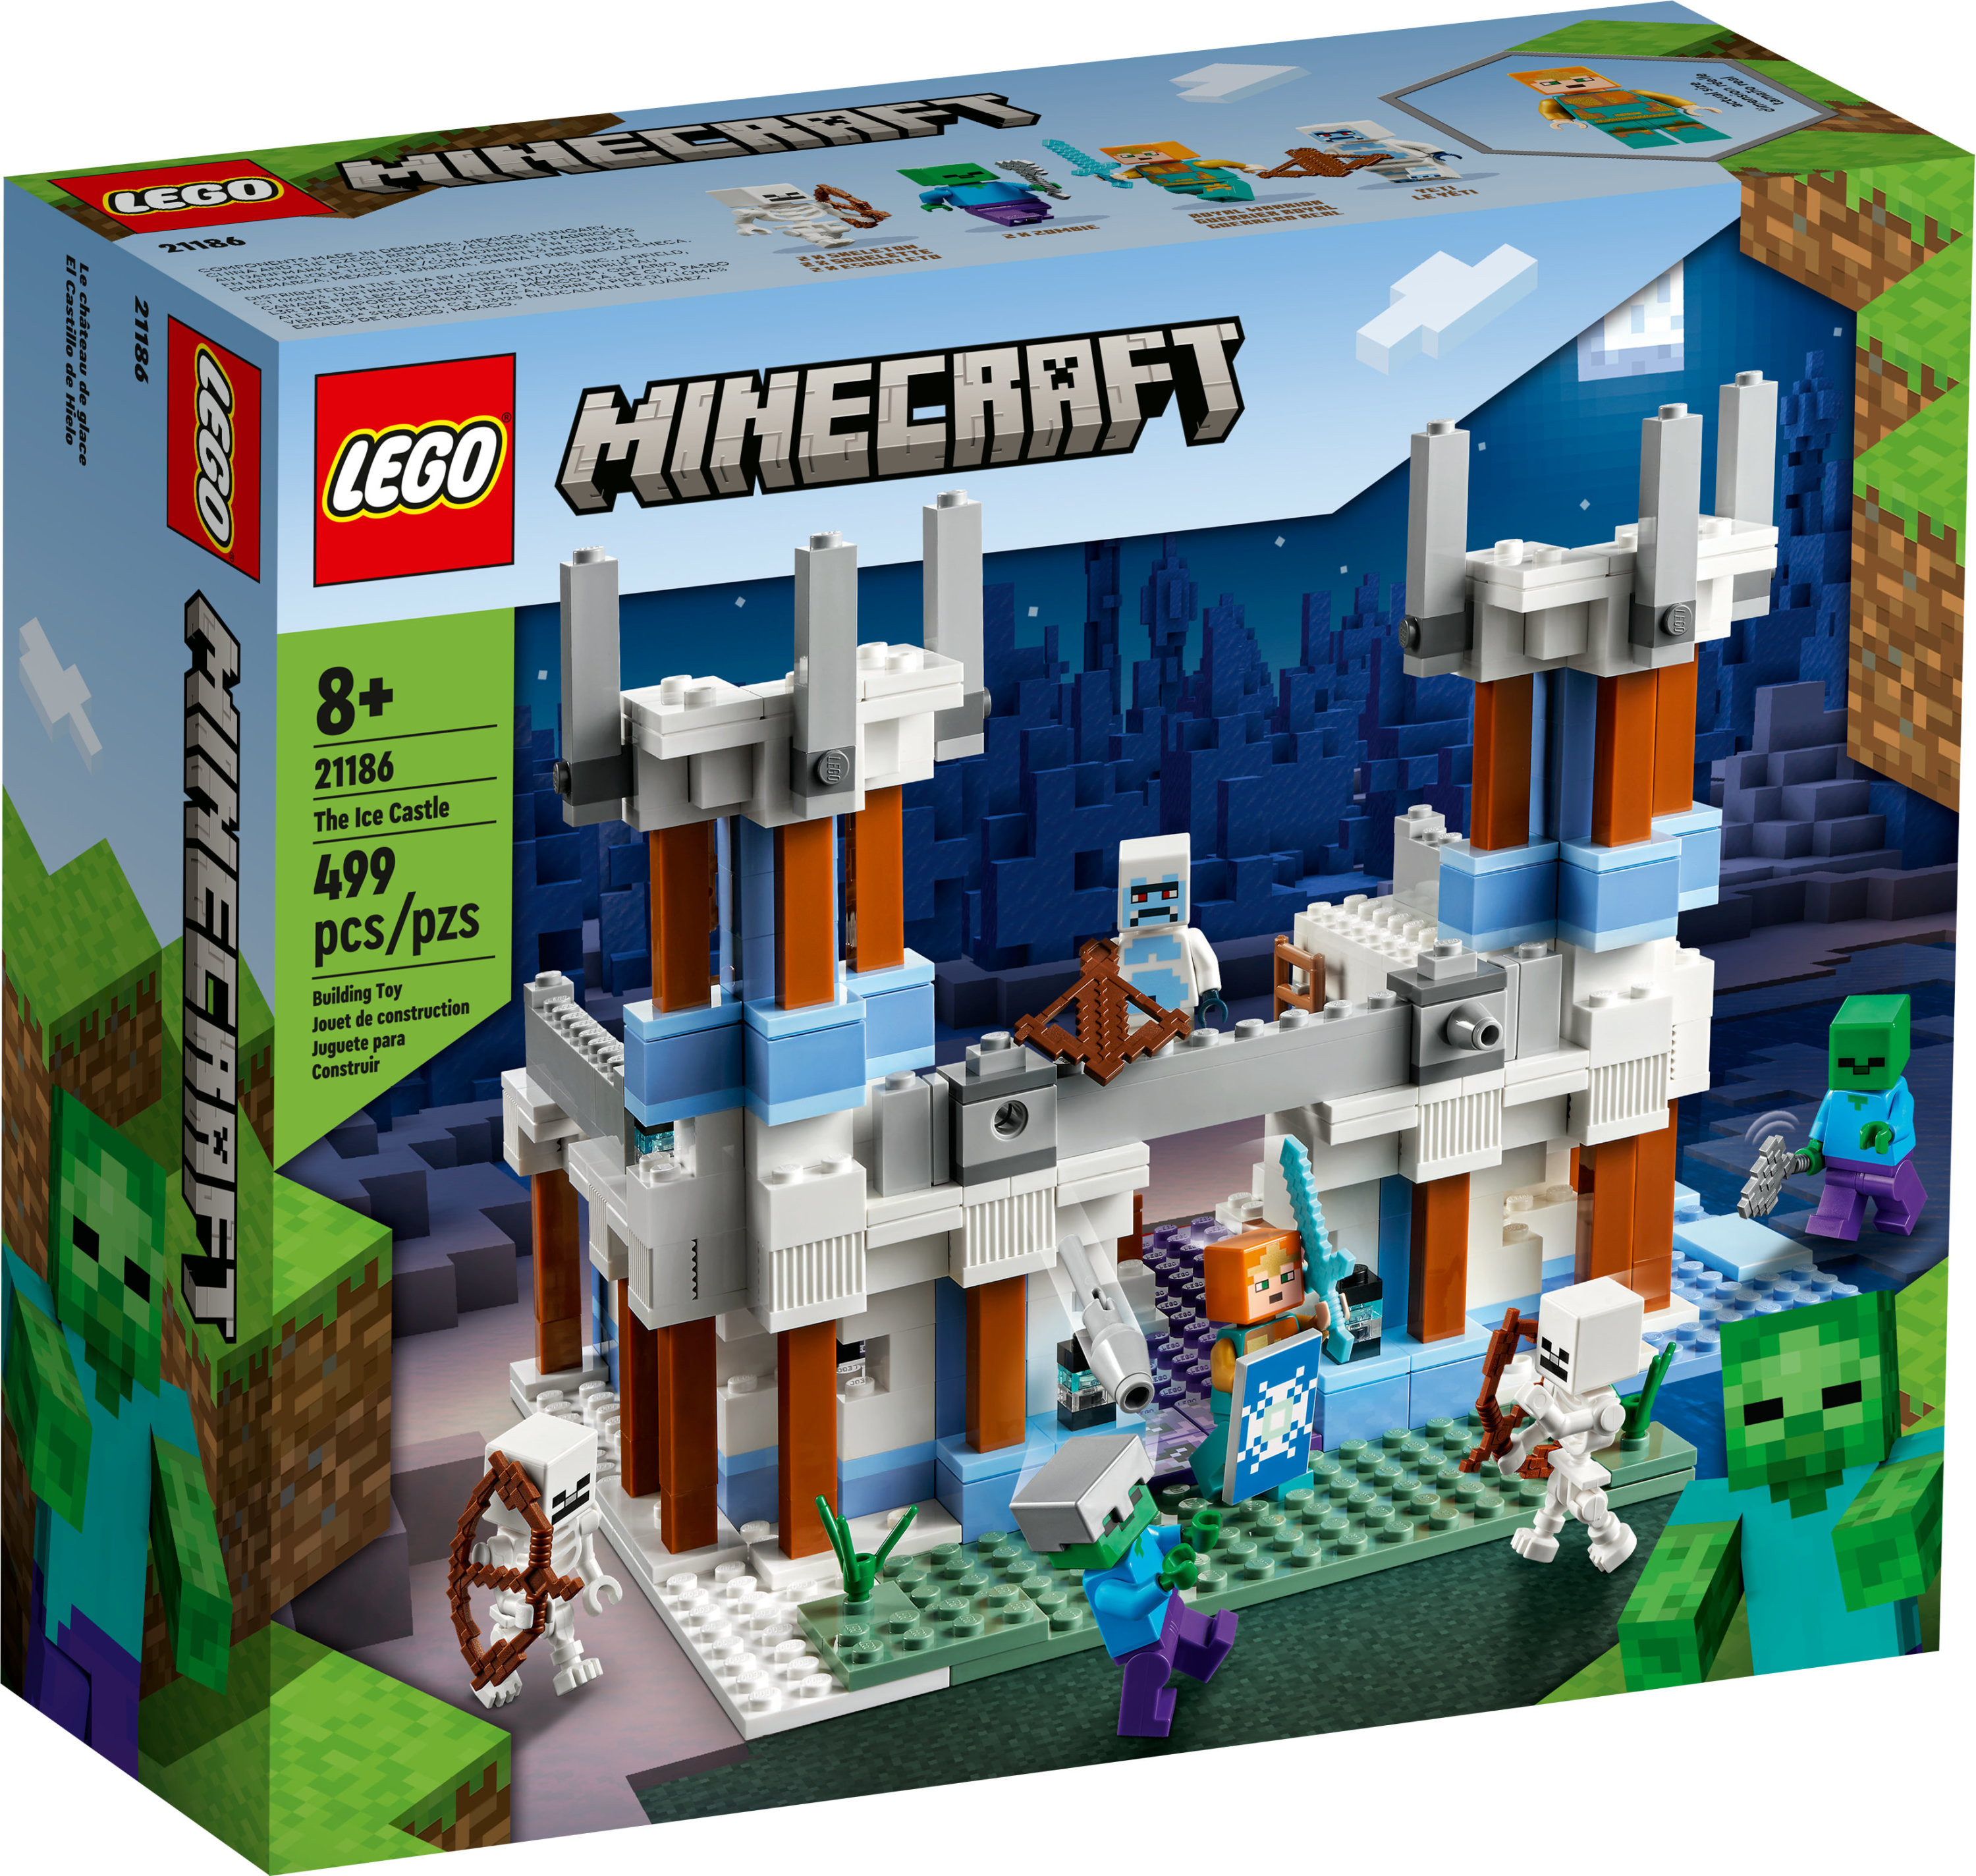 LEGO Minecraft The Ice Castle Toy with Zombie and Skeleton Mobs Figures, 21186 Birthday Gift Idea for Kids, Boys and Girls Ages 8 Plus - image 3 of 8